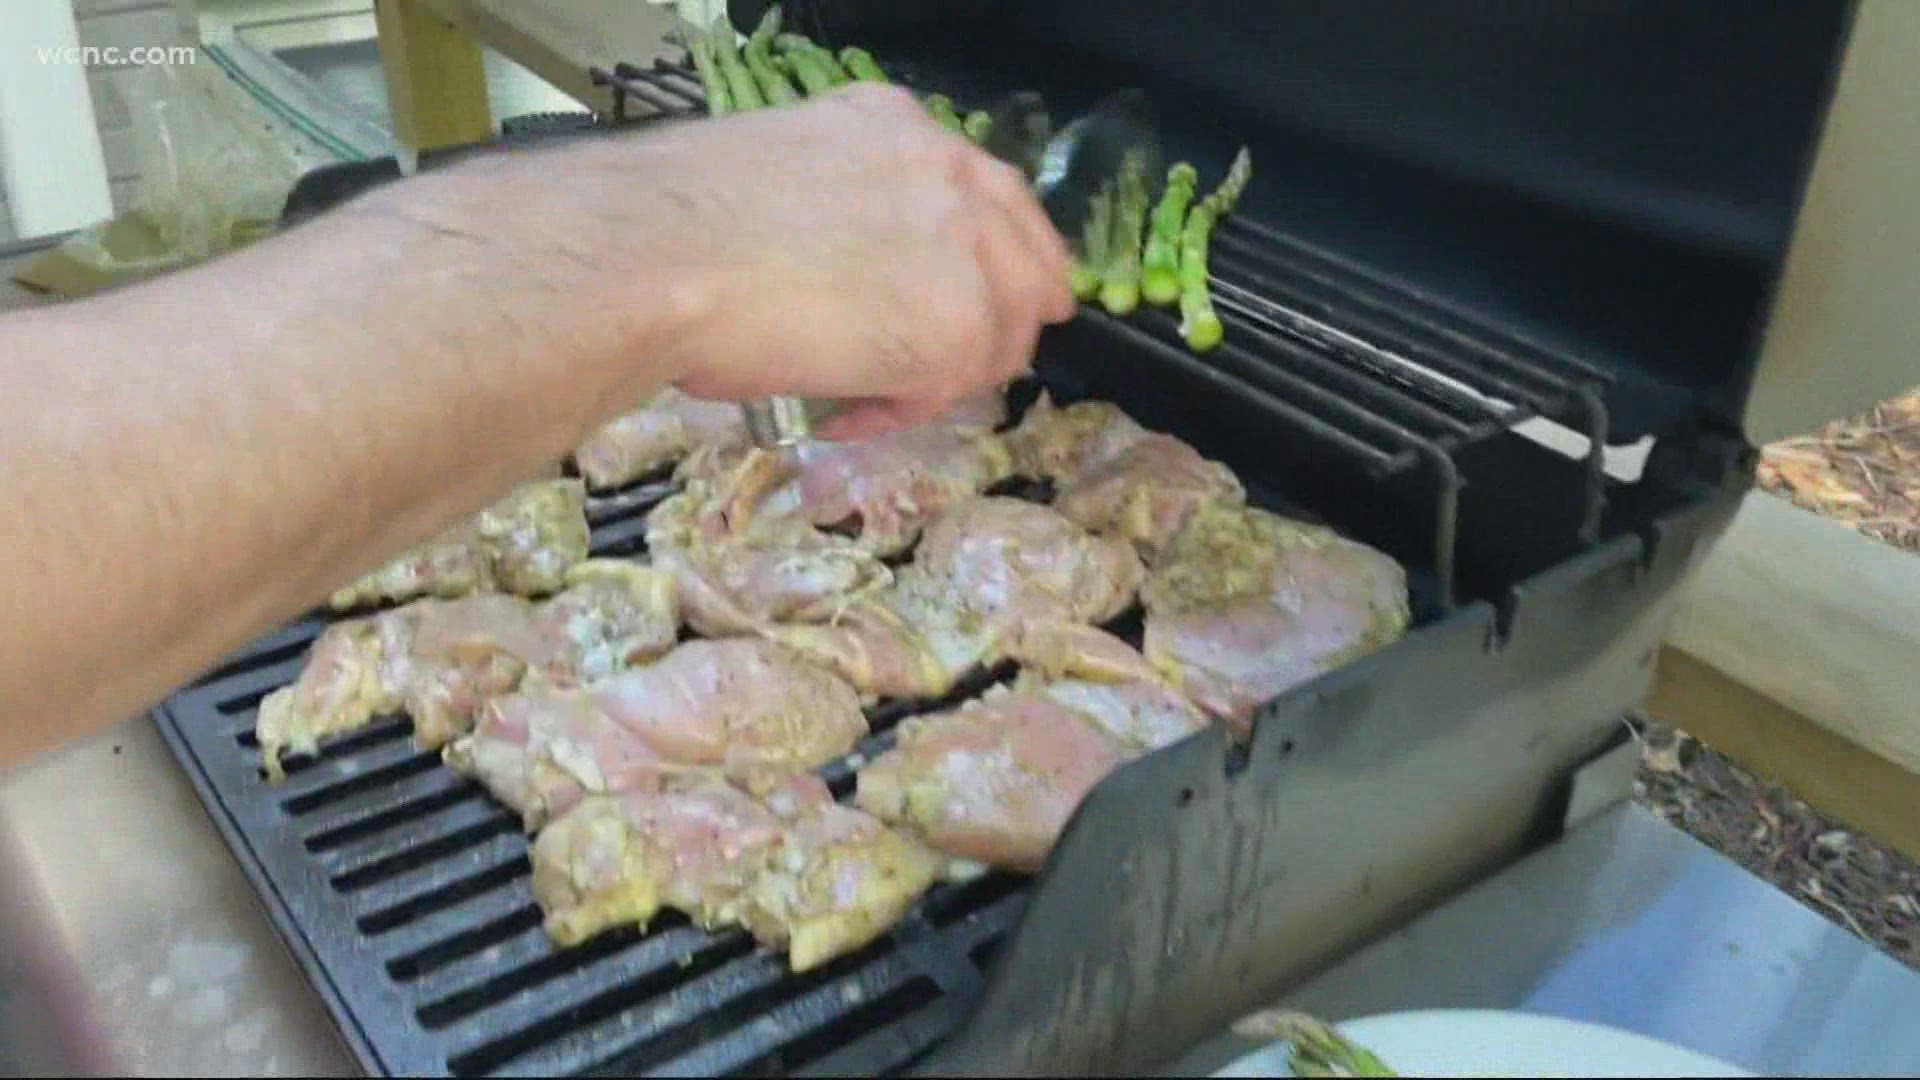 In addition to reminders about food safety, health officials are warning the public to keep the pandemic in mind when grilling this summer.